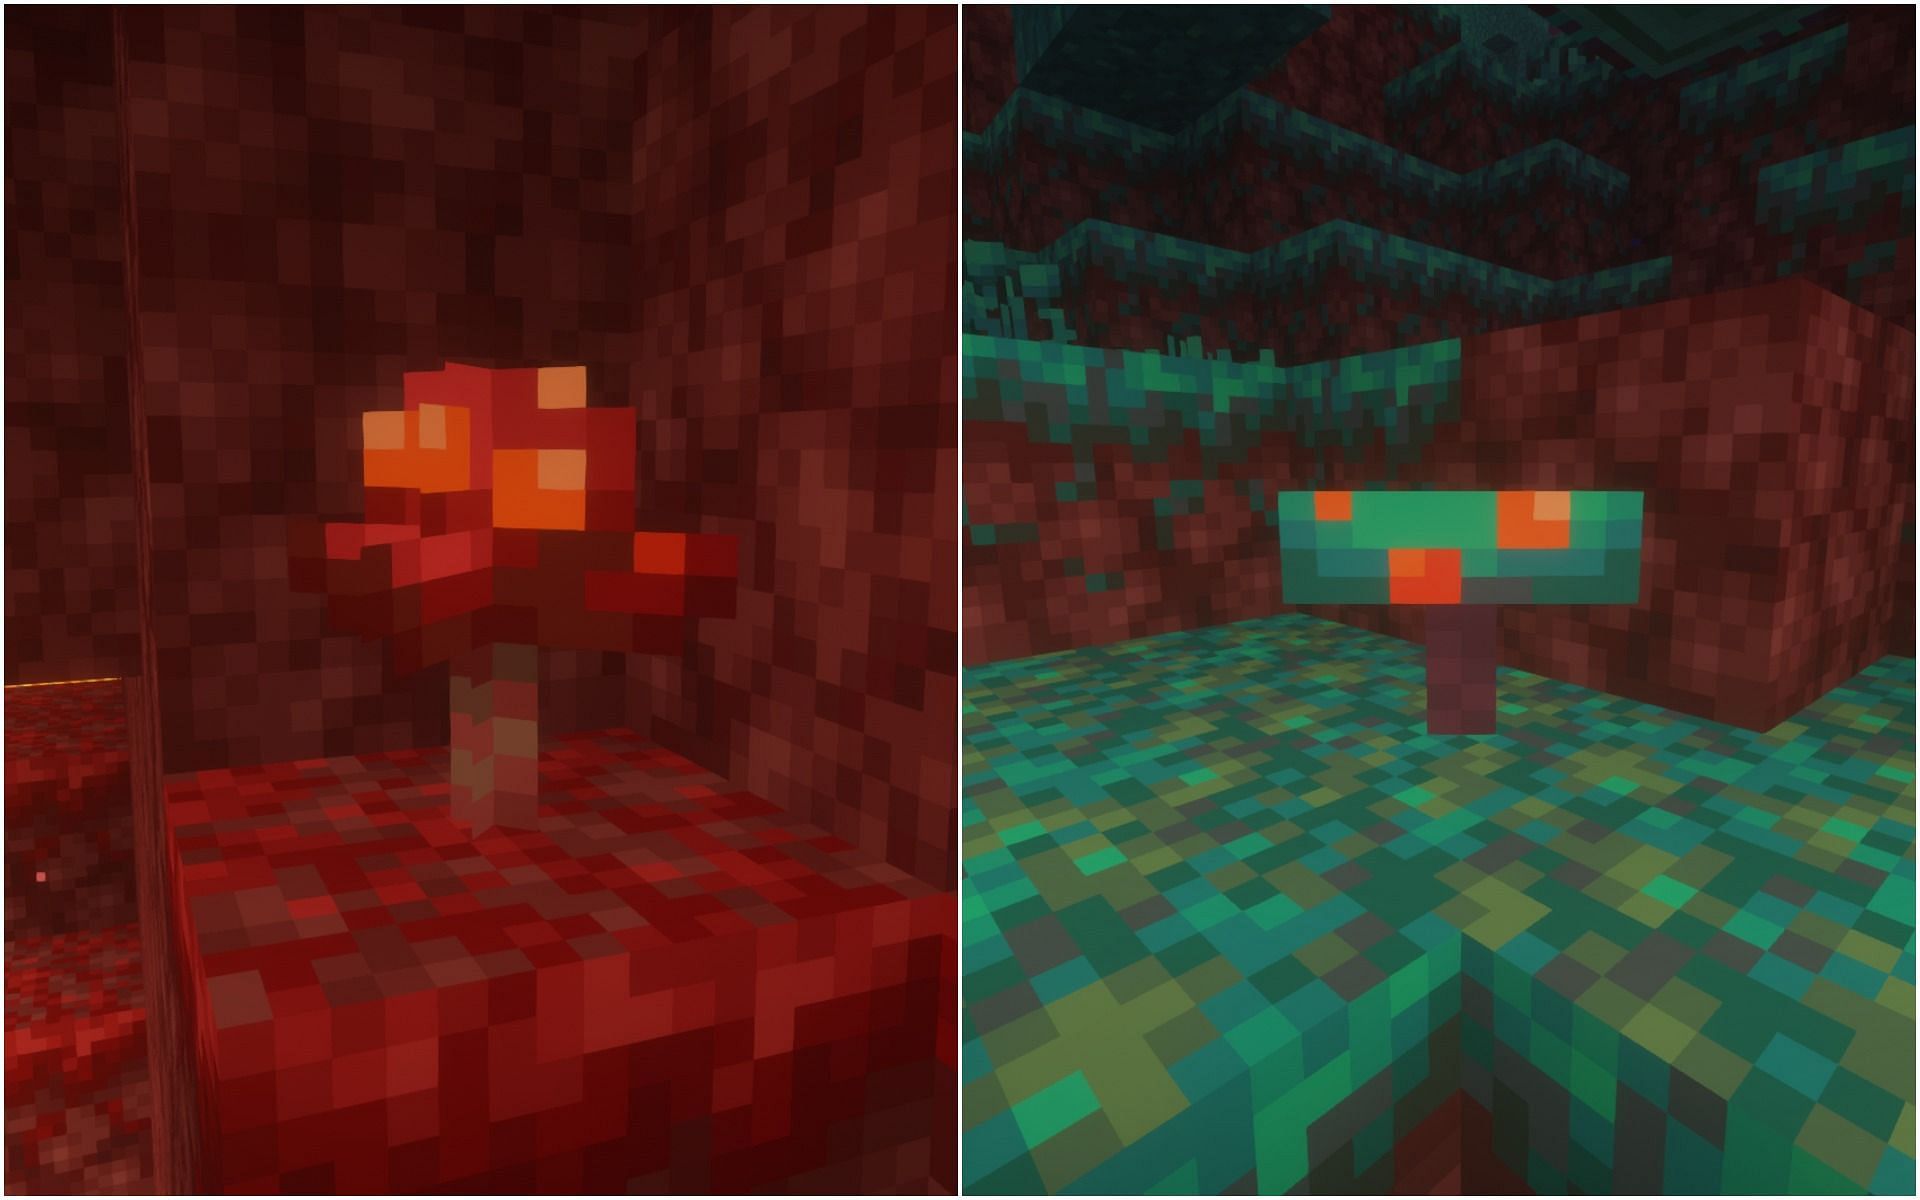 More about the two types of fungi (Image via Minecraft)